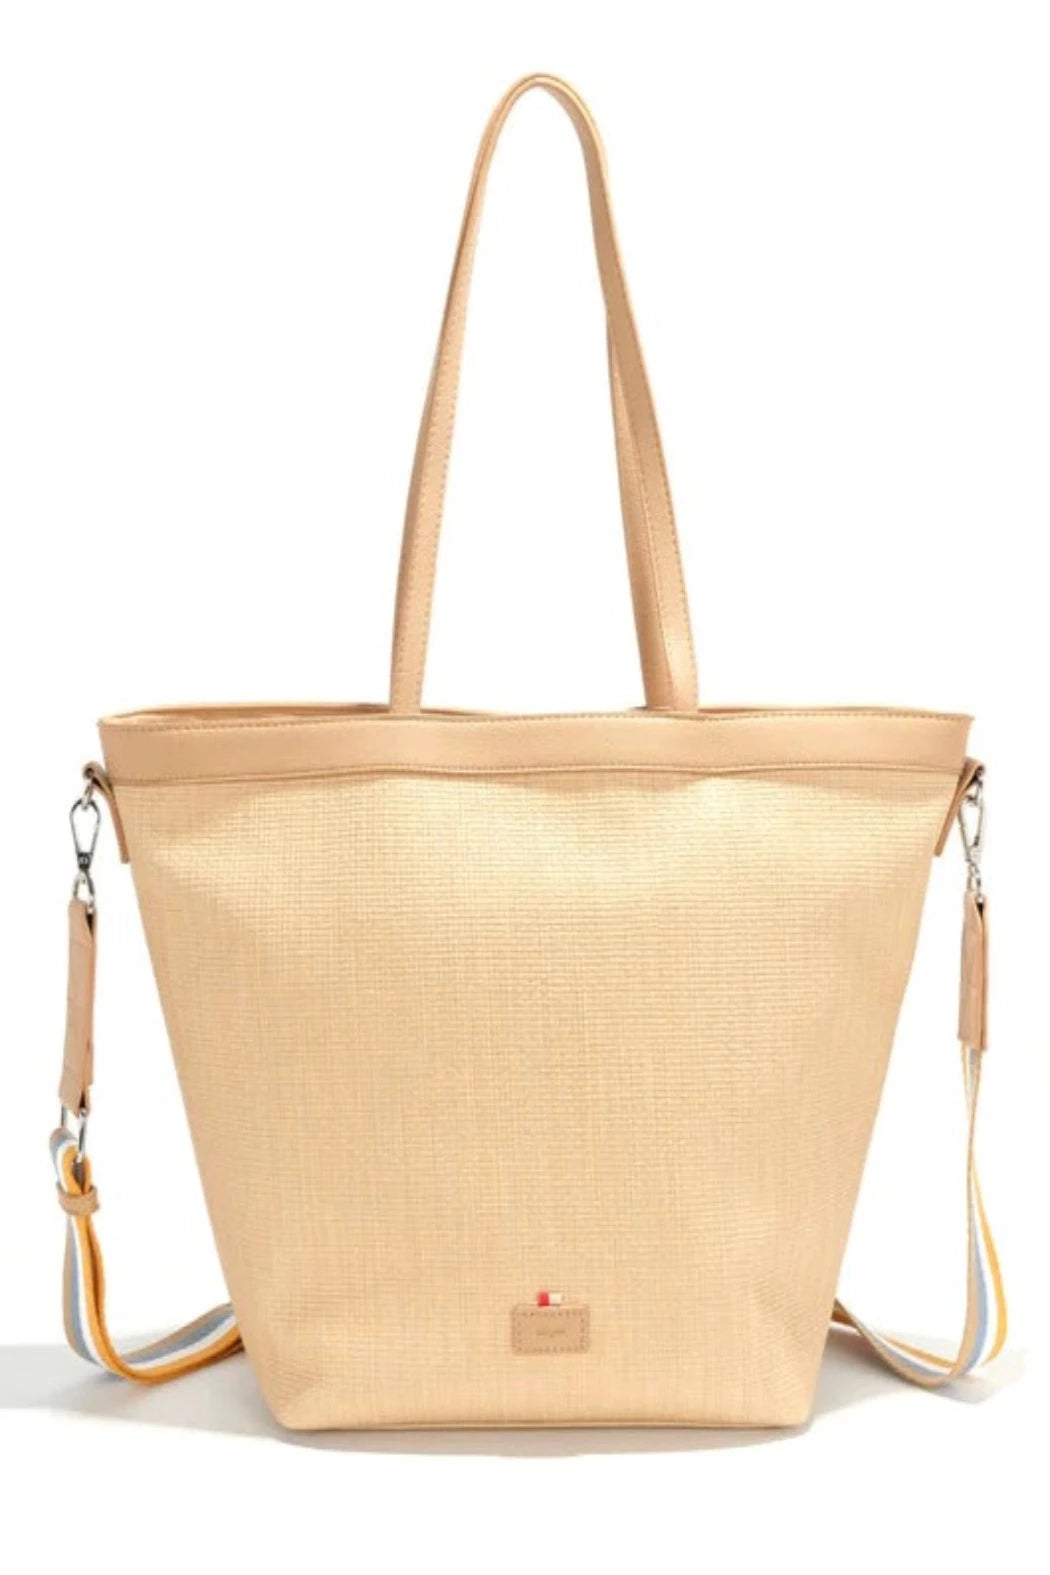 Calliope Virgo Air Tote - Straw | Colab - Clearance